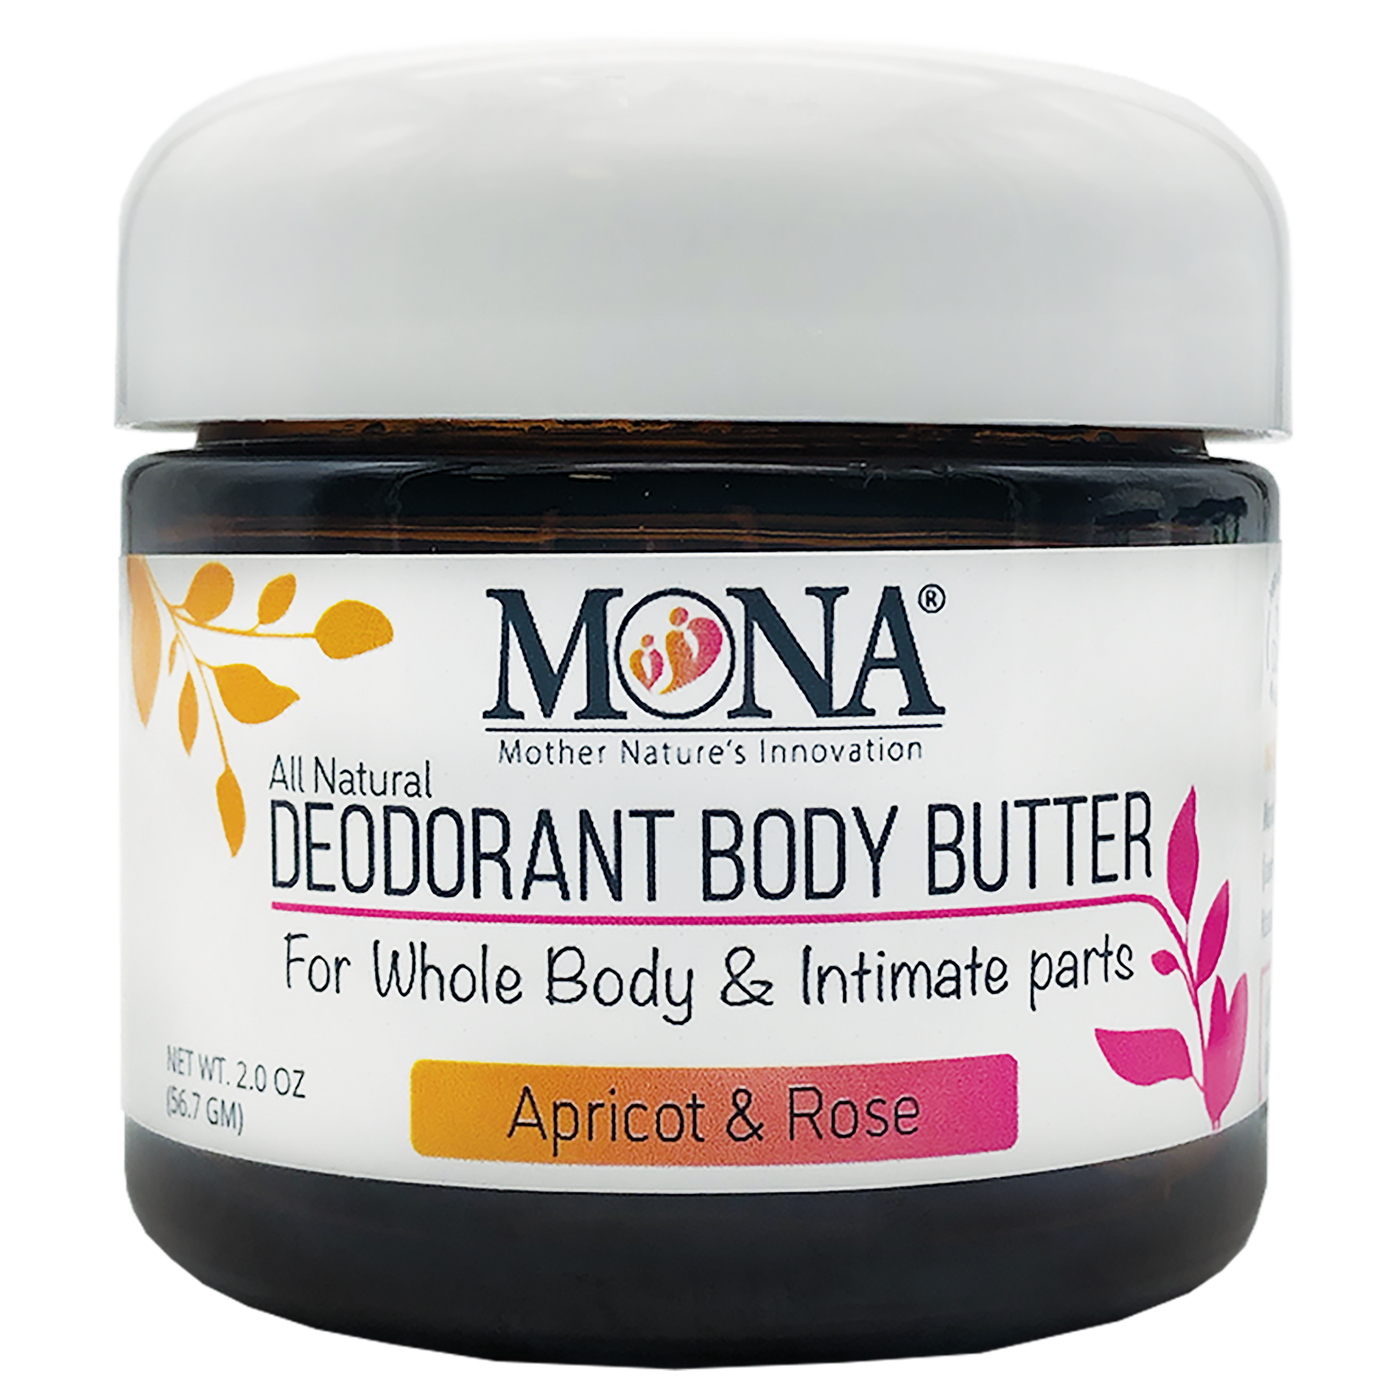 Deodorant Body Butter for Whole Body & Intimate Parts | 2.0 Oz